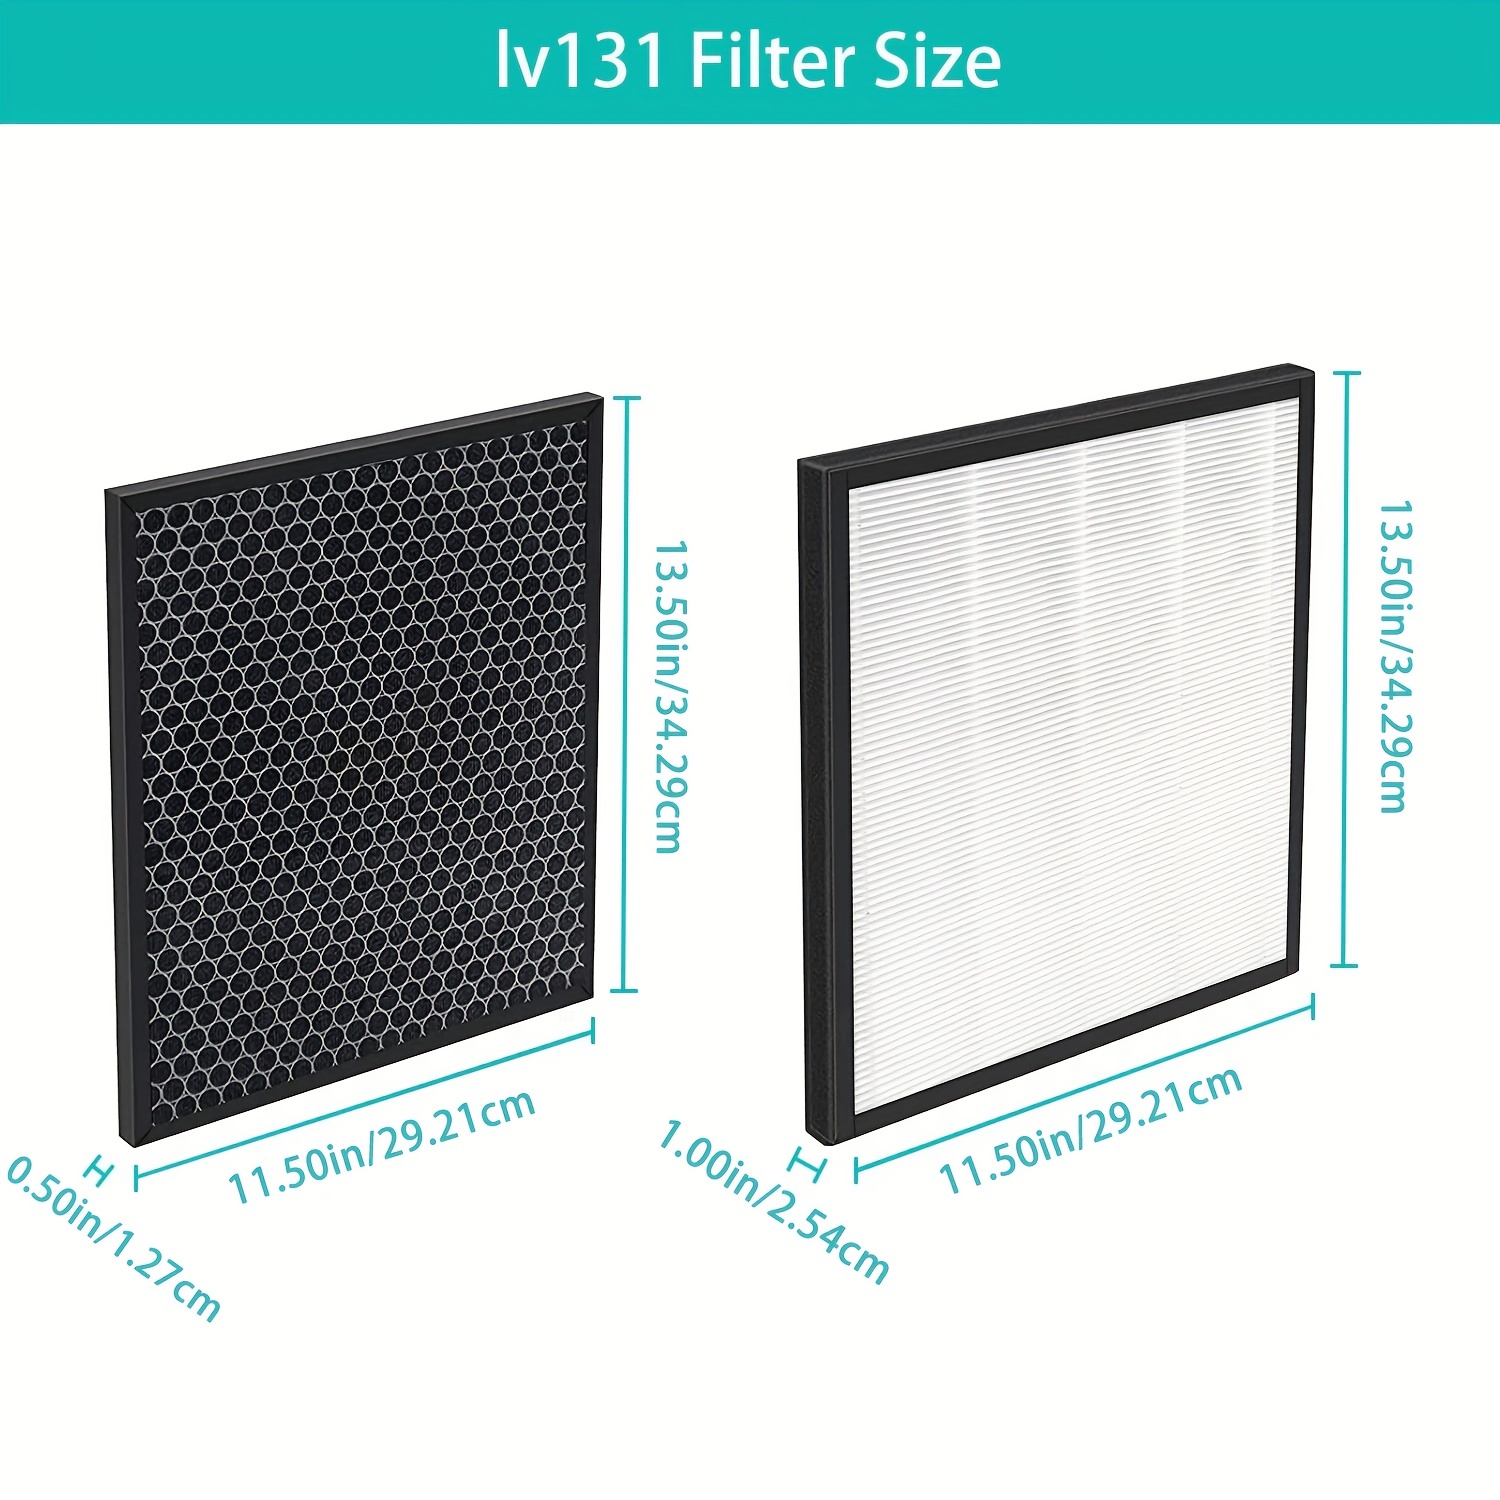  LV-Pur131 Replacement Filters for Levoit LV-Pur131 Air Purifier,  LV-PUR131S Levoit Air Purifier - Part# LV-PUR131-RF - 2 True HEPA and 2  Carbon Filters : Home & Kitchen